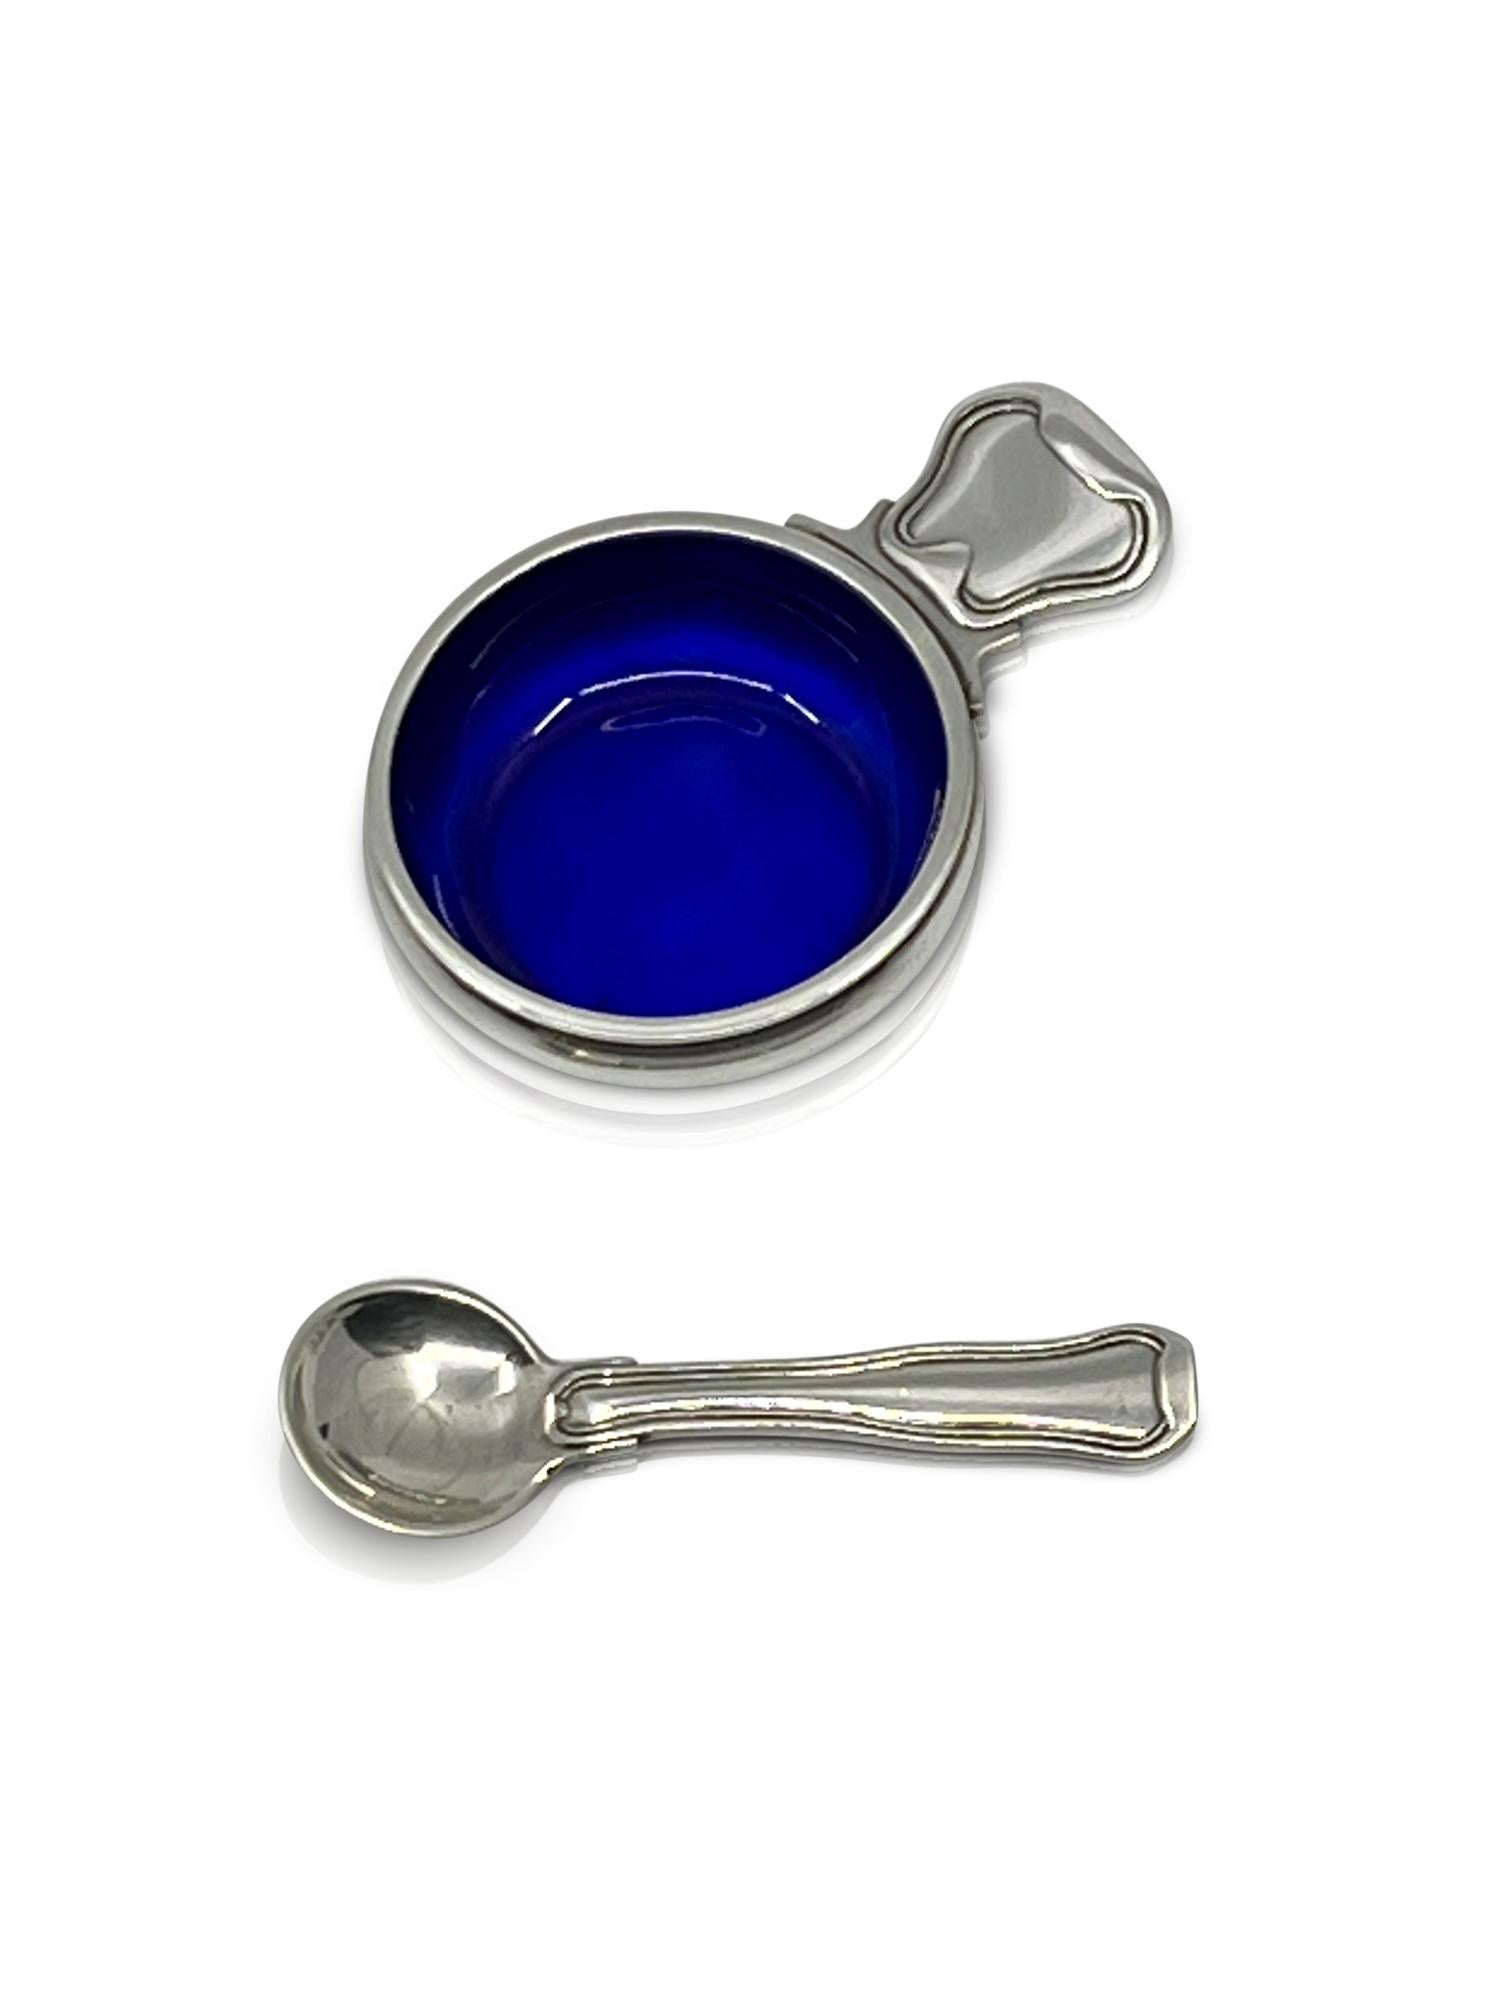 Sterling silver Georg Jensen salt cellar with blue enamel lining and matching salt spoon, items 102 & 103 in the Old Danish pattern, design #100 by Harald Nielsen from 1947.

Additional information:
Material: Sterling silver
Styles: Arrt